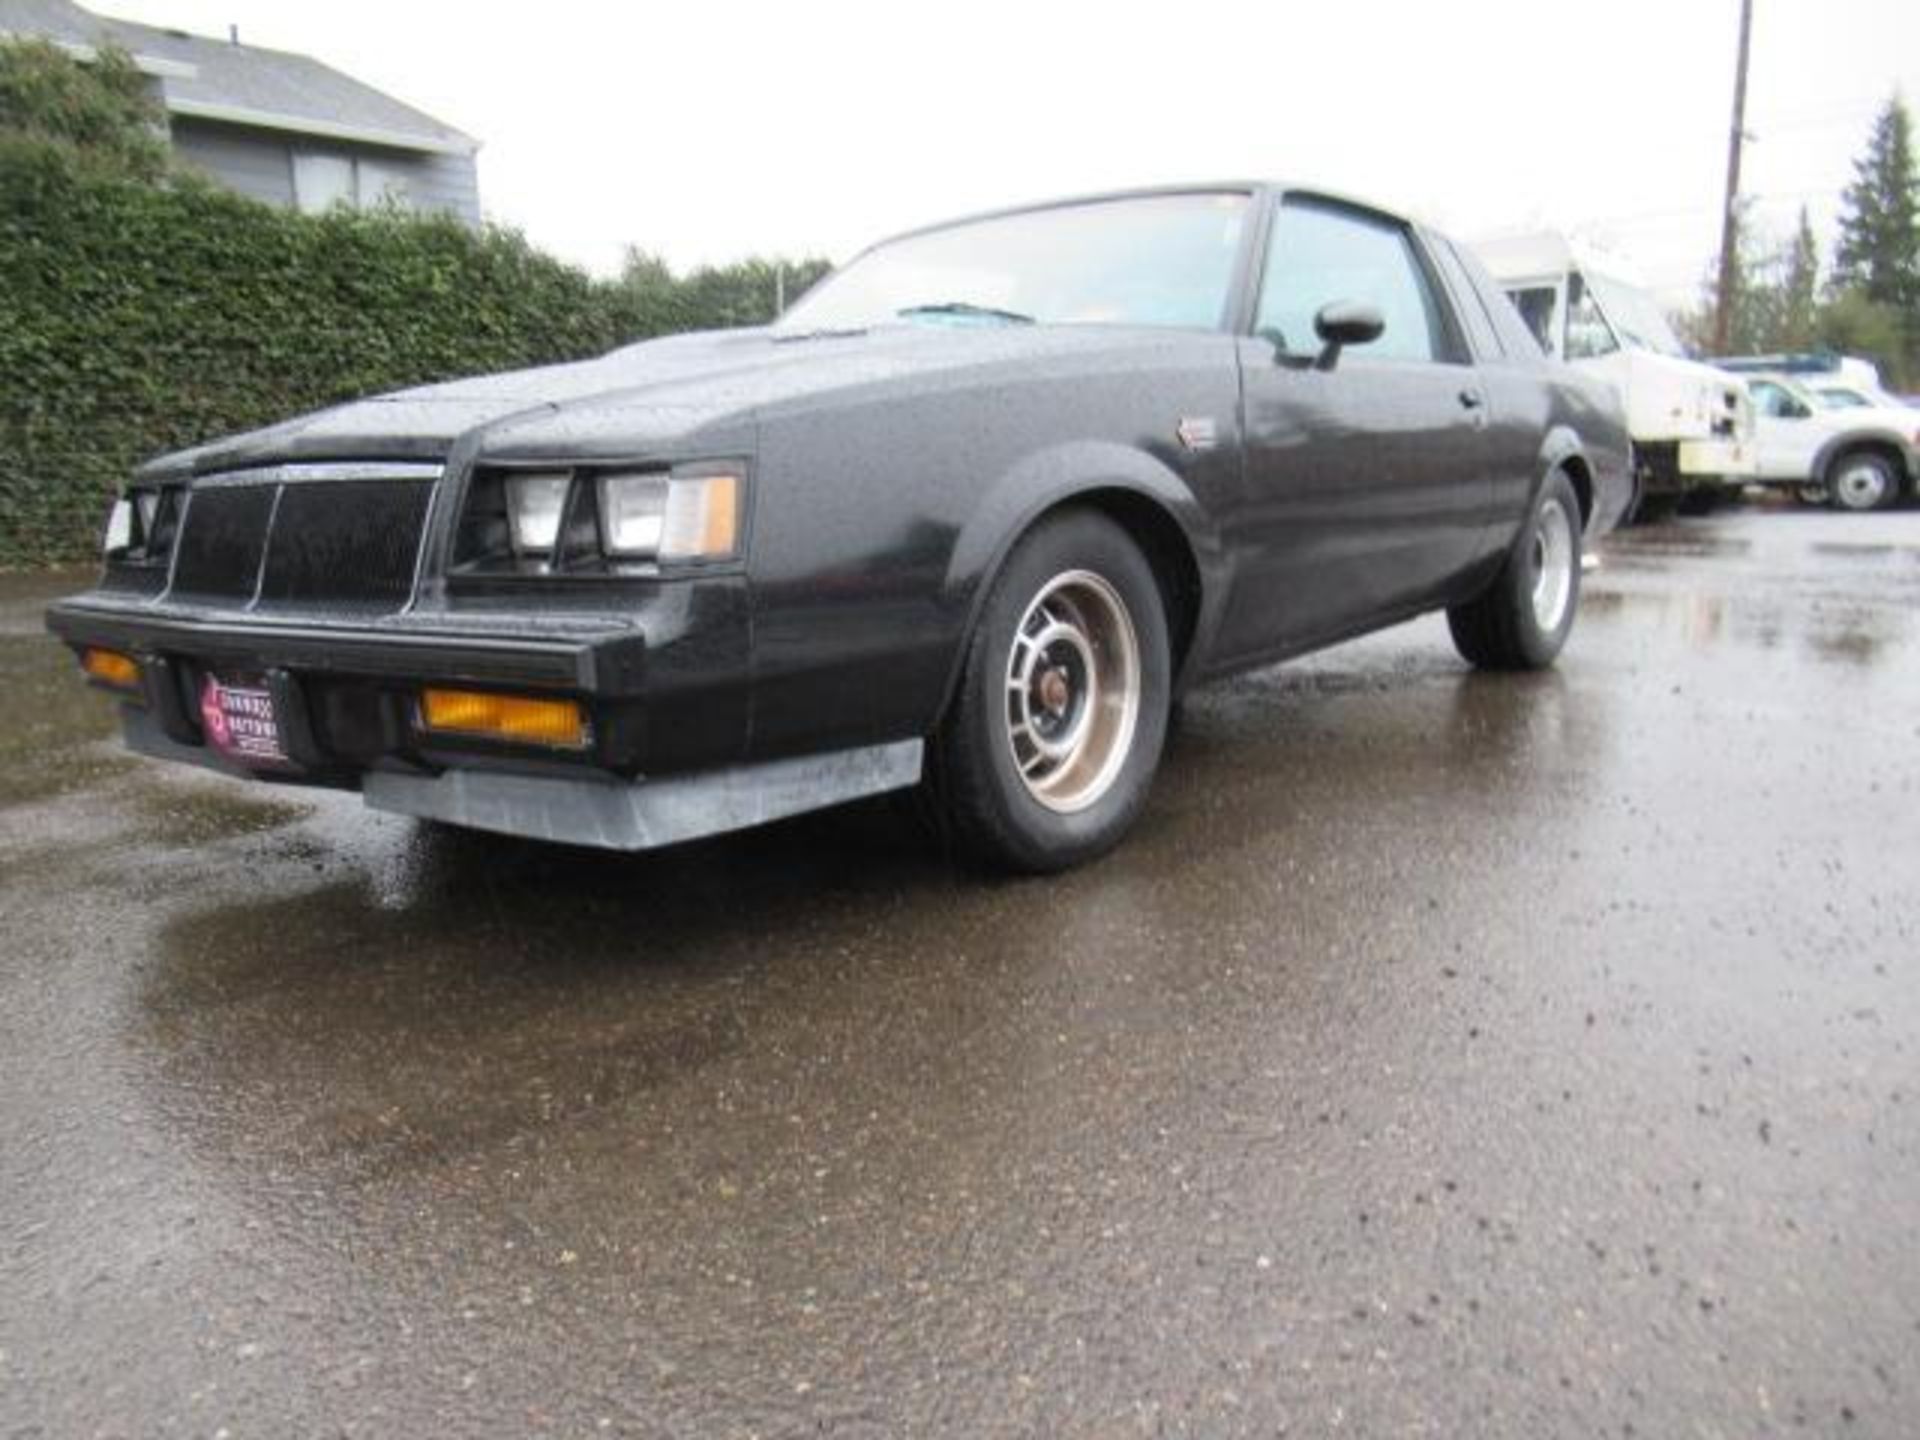 1986 BUICK GRAND NATIONAL - Image 2 of 30